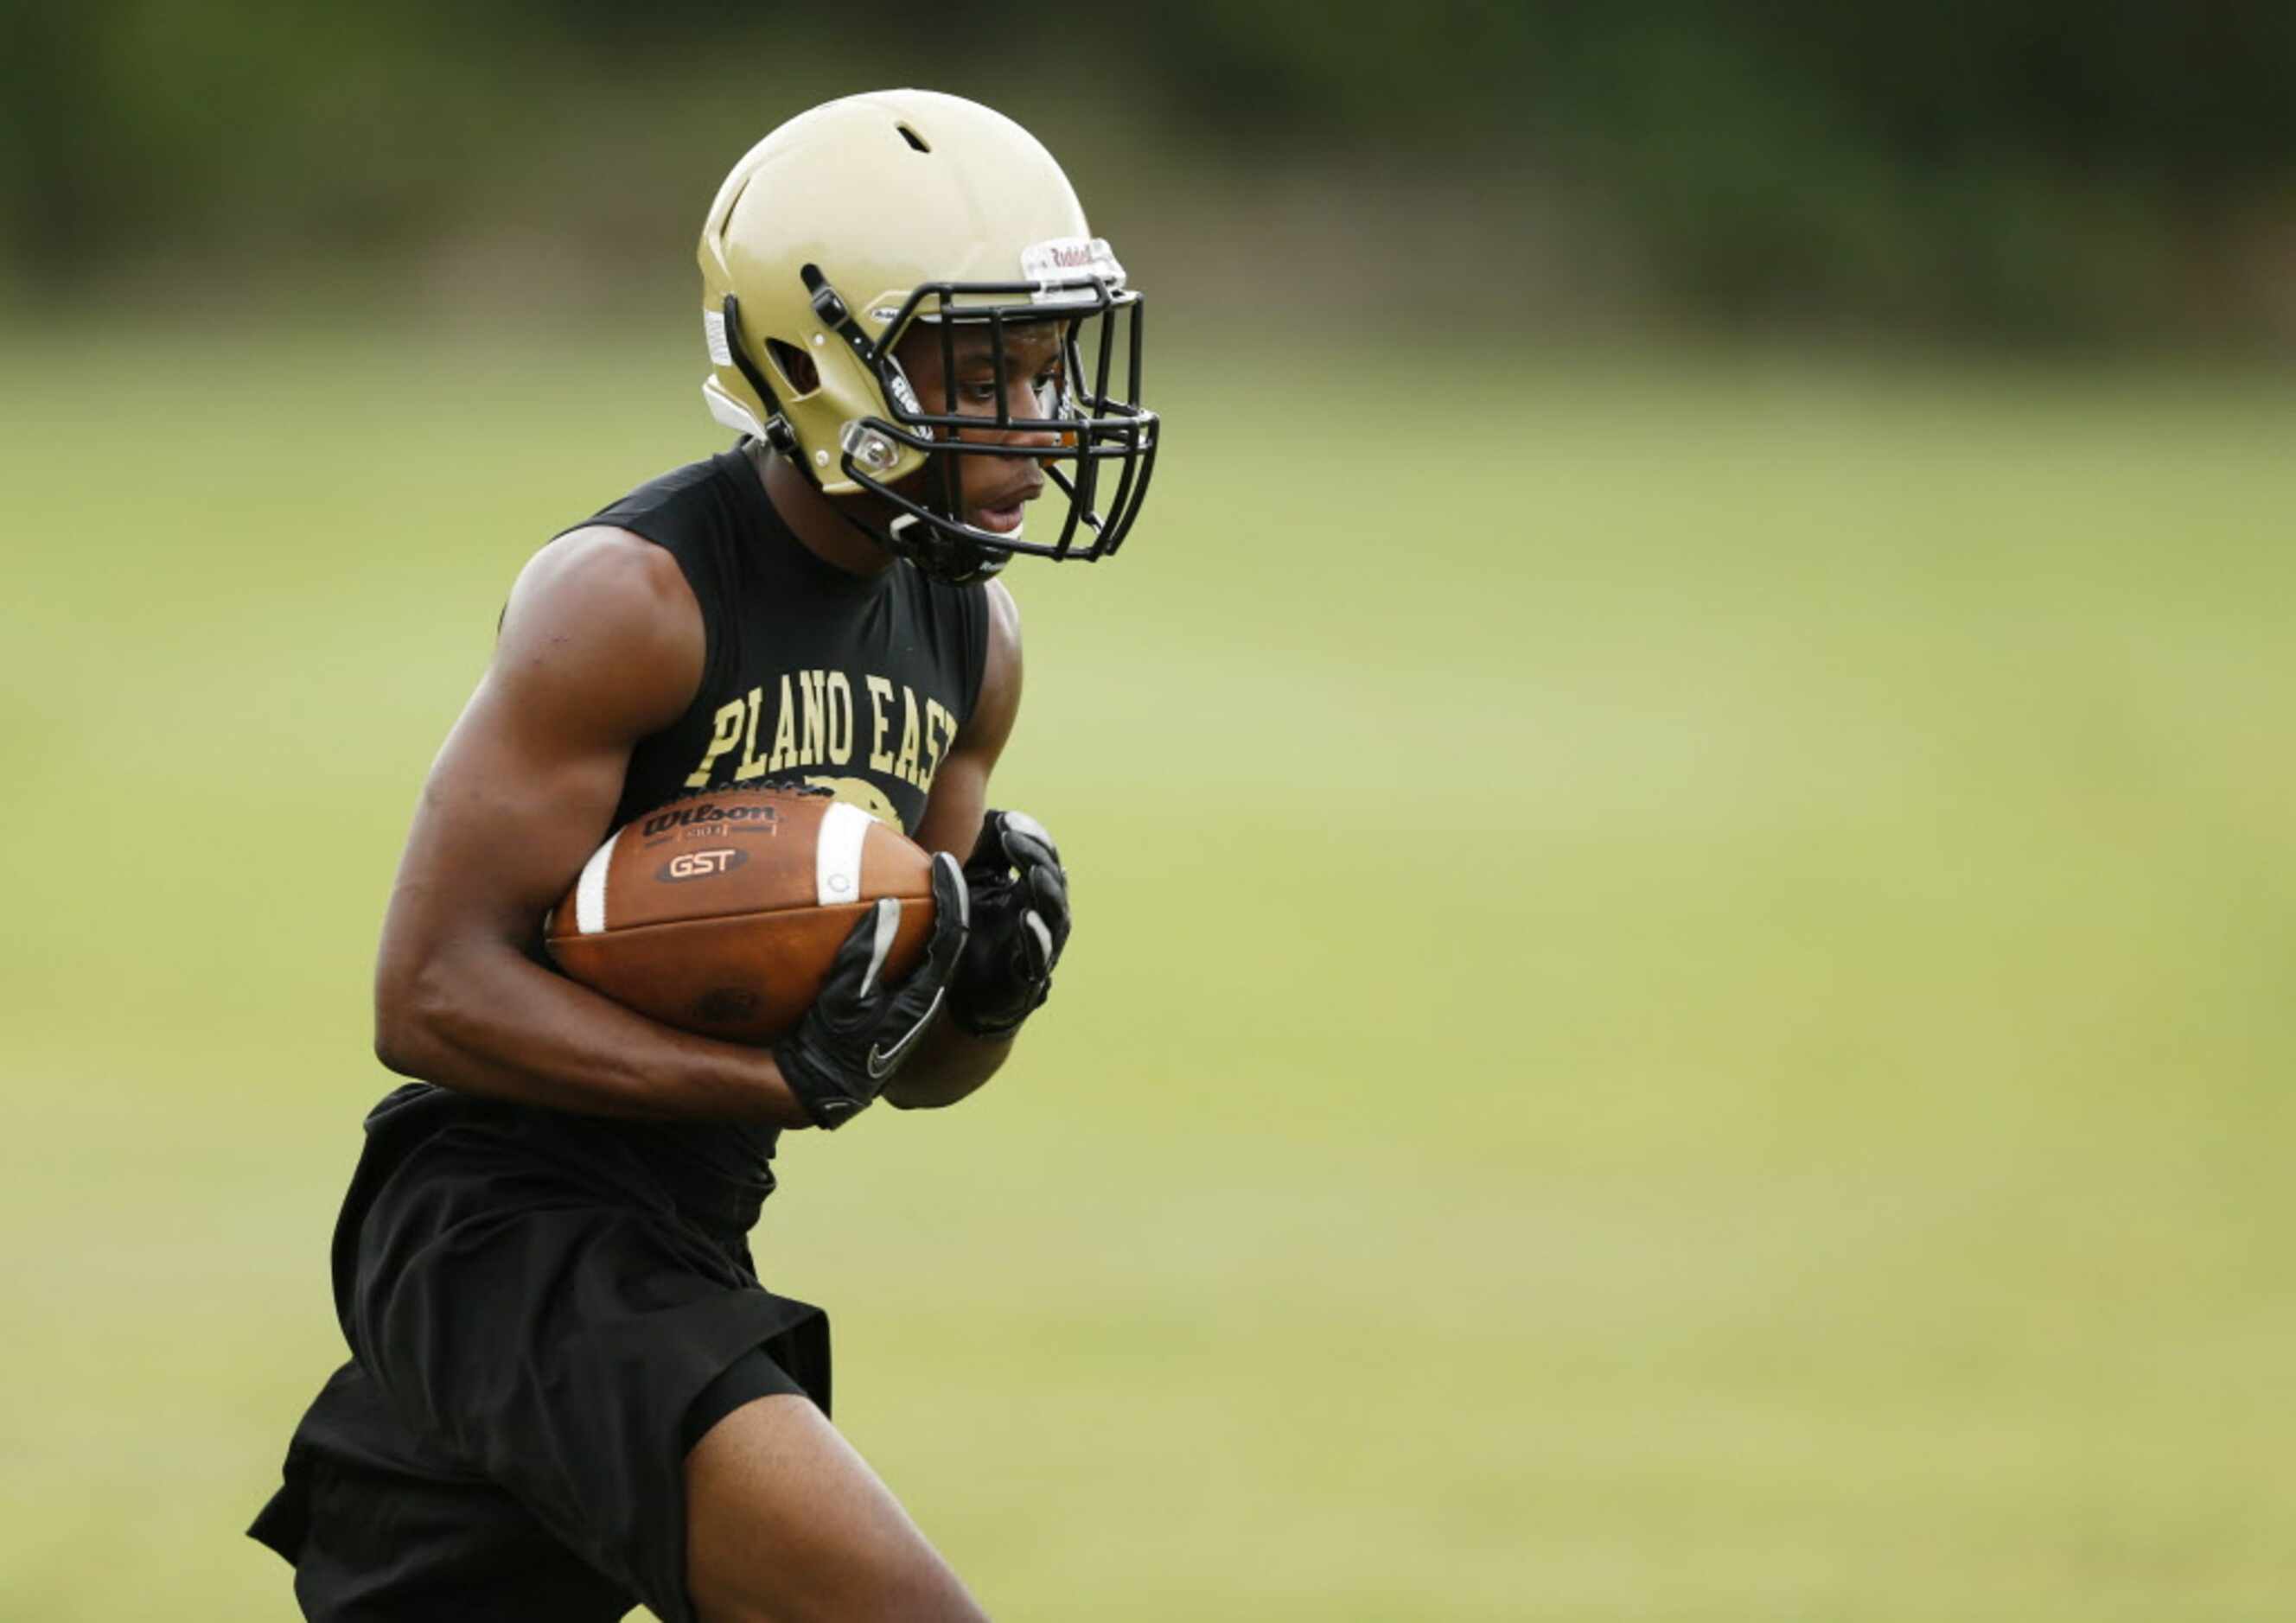 Plano East's running back Jaquawan Douglas rushes the ball up the field on a play during the...